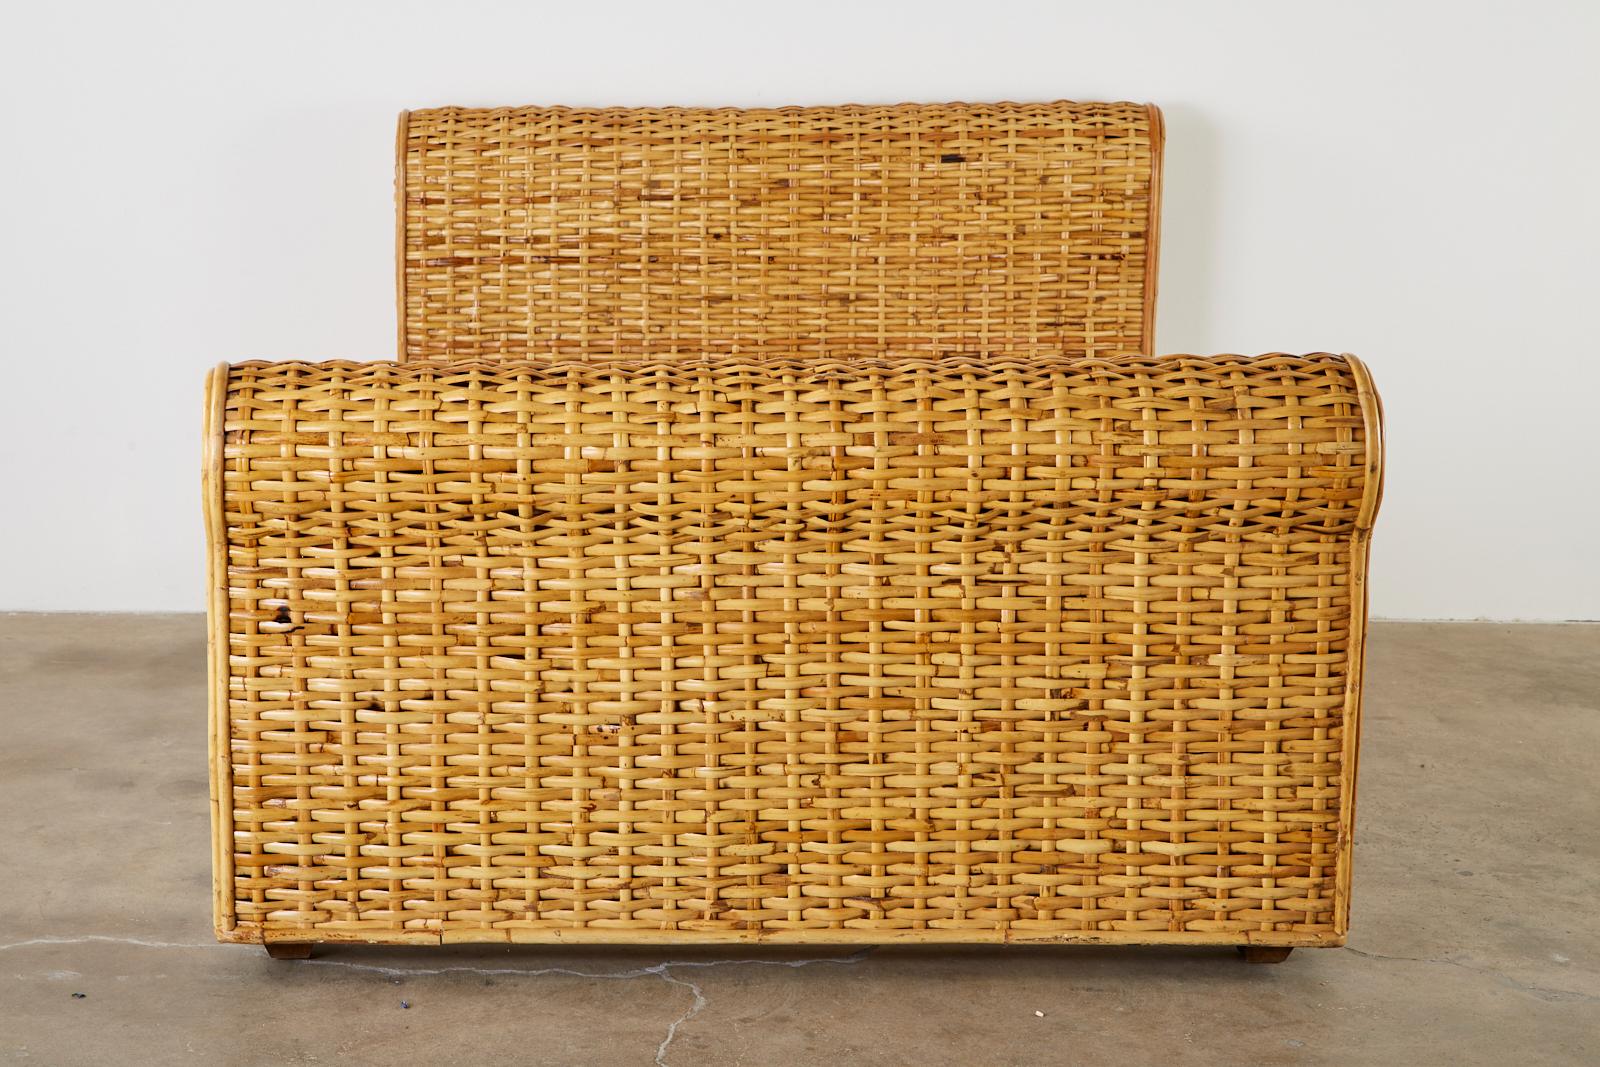 Organic modern style woven bamboo rattan bed by Ralph Lauren Home Polo collection. The large bed features a subtle sleigh form on each end of the frame. Very heavy and solid with makers plaque on the headboard. From an estate in Malibu, CA.